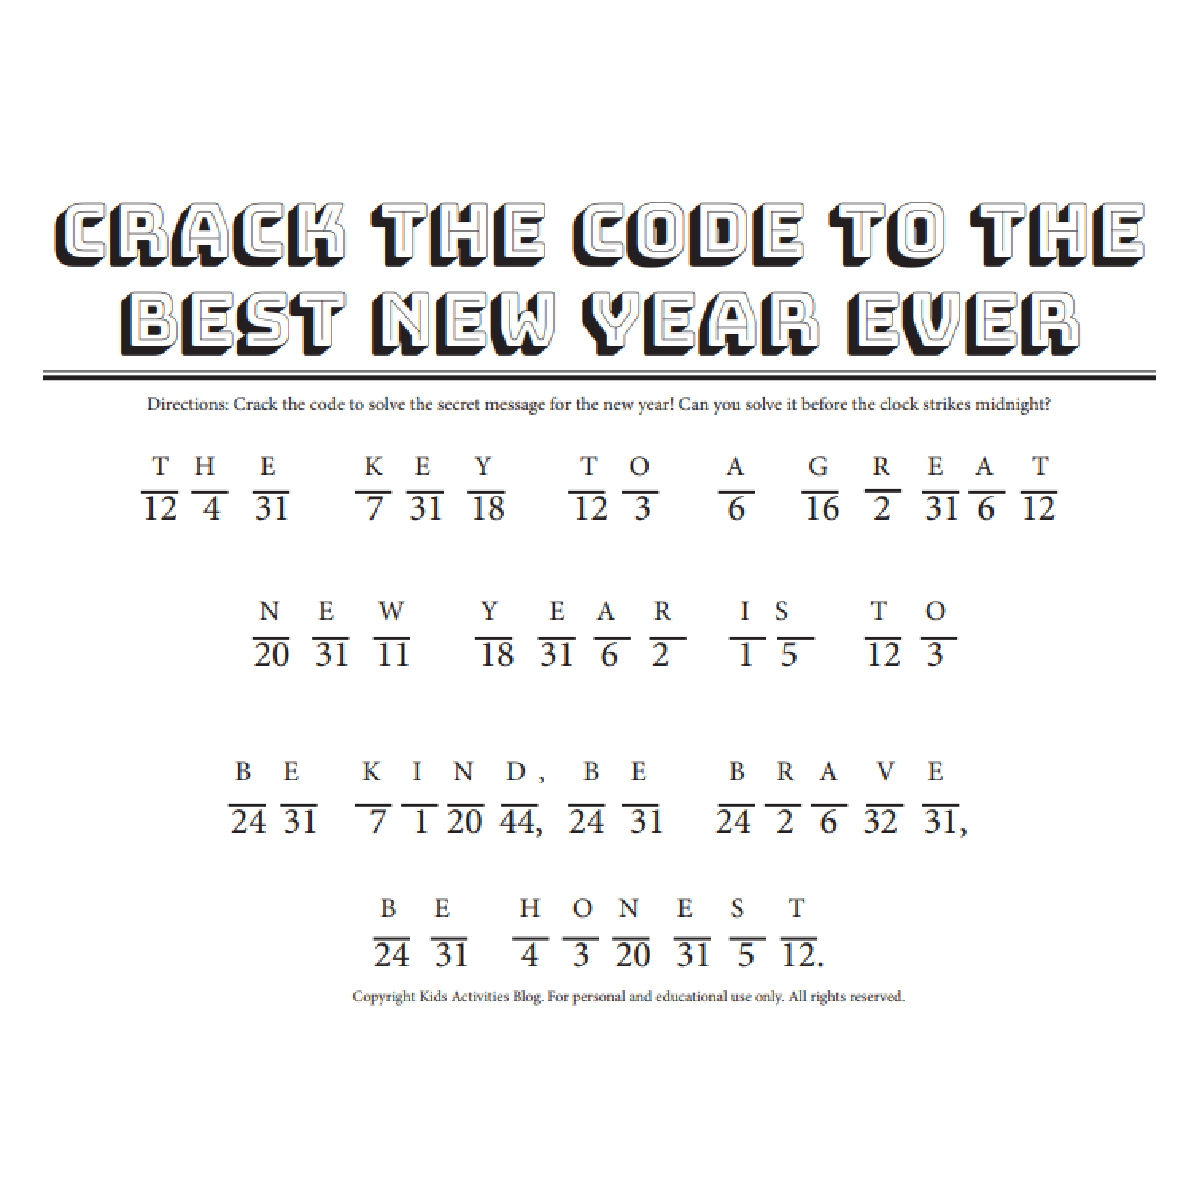 Crack the code worksheets new years eve page 2 printed pdf black and white worksheet- kids activities blog